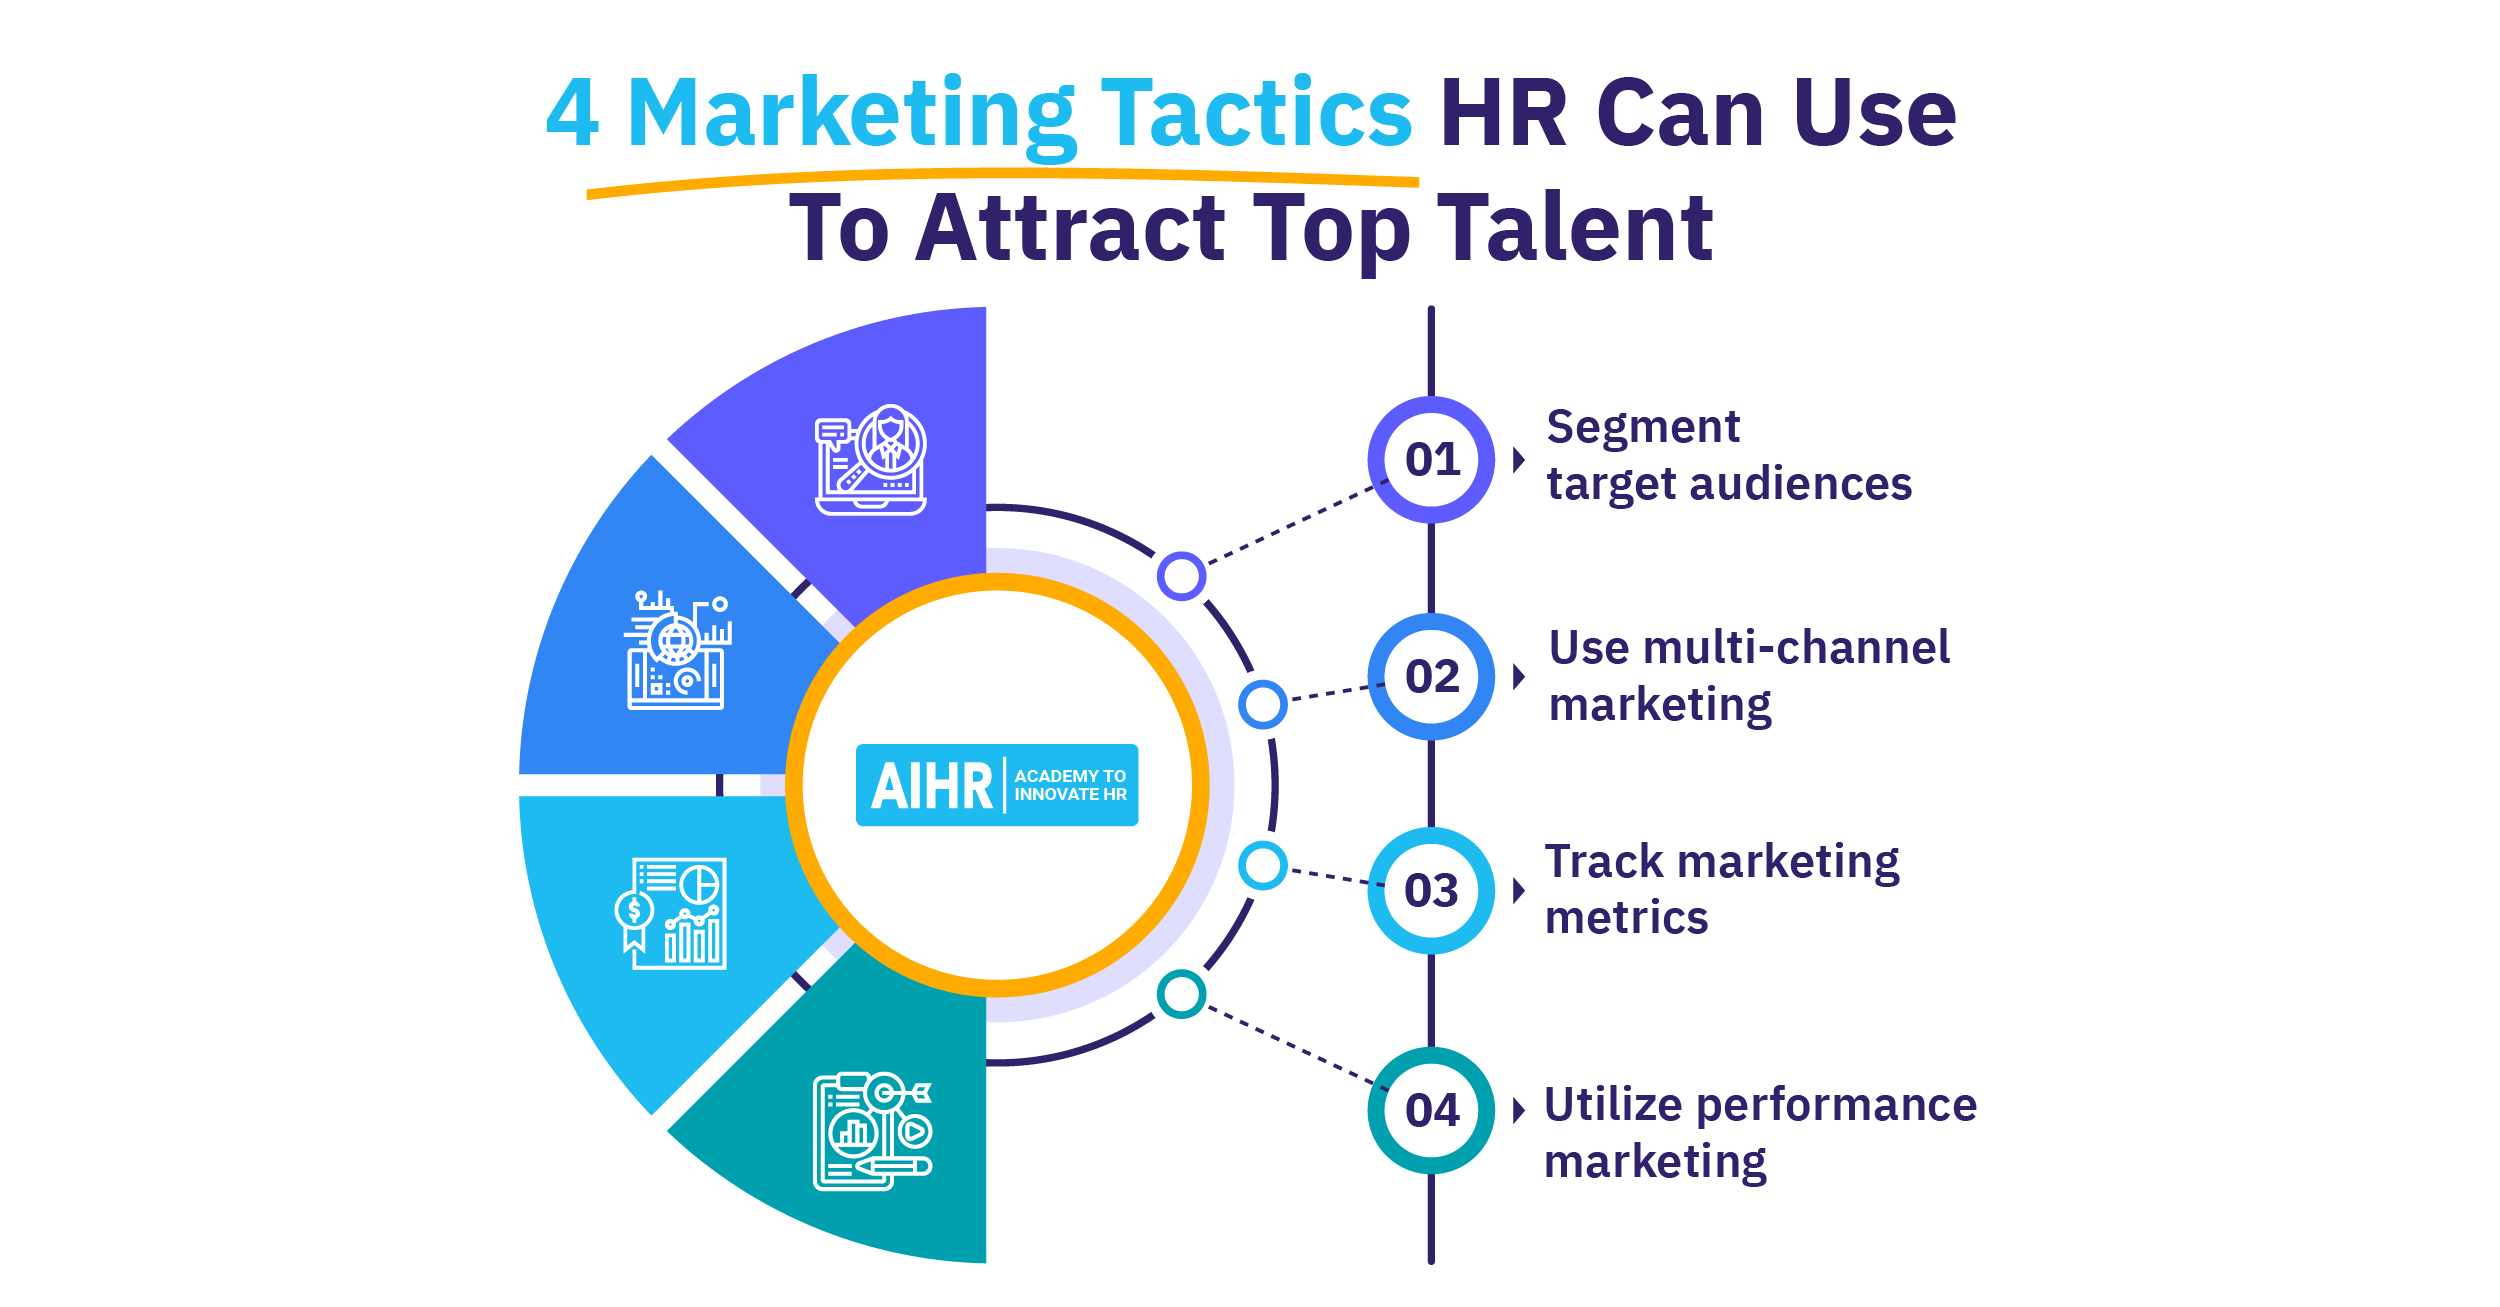 Incorporate marketing tactics into your hiring process to attract candidates that add real value.